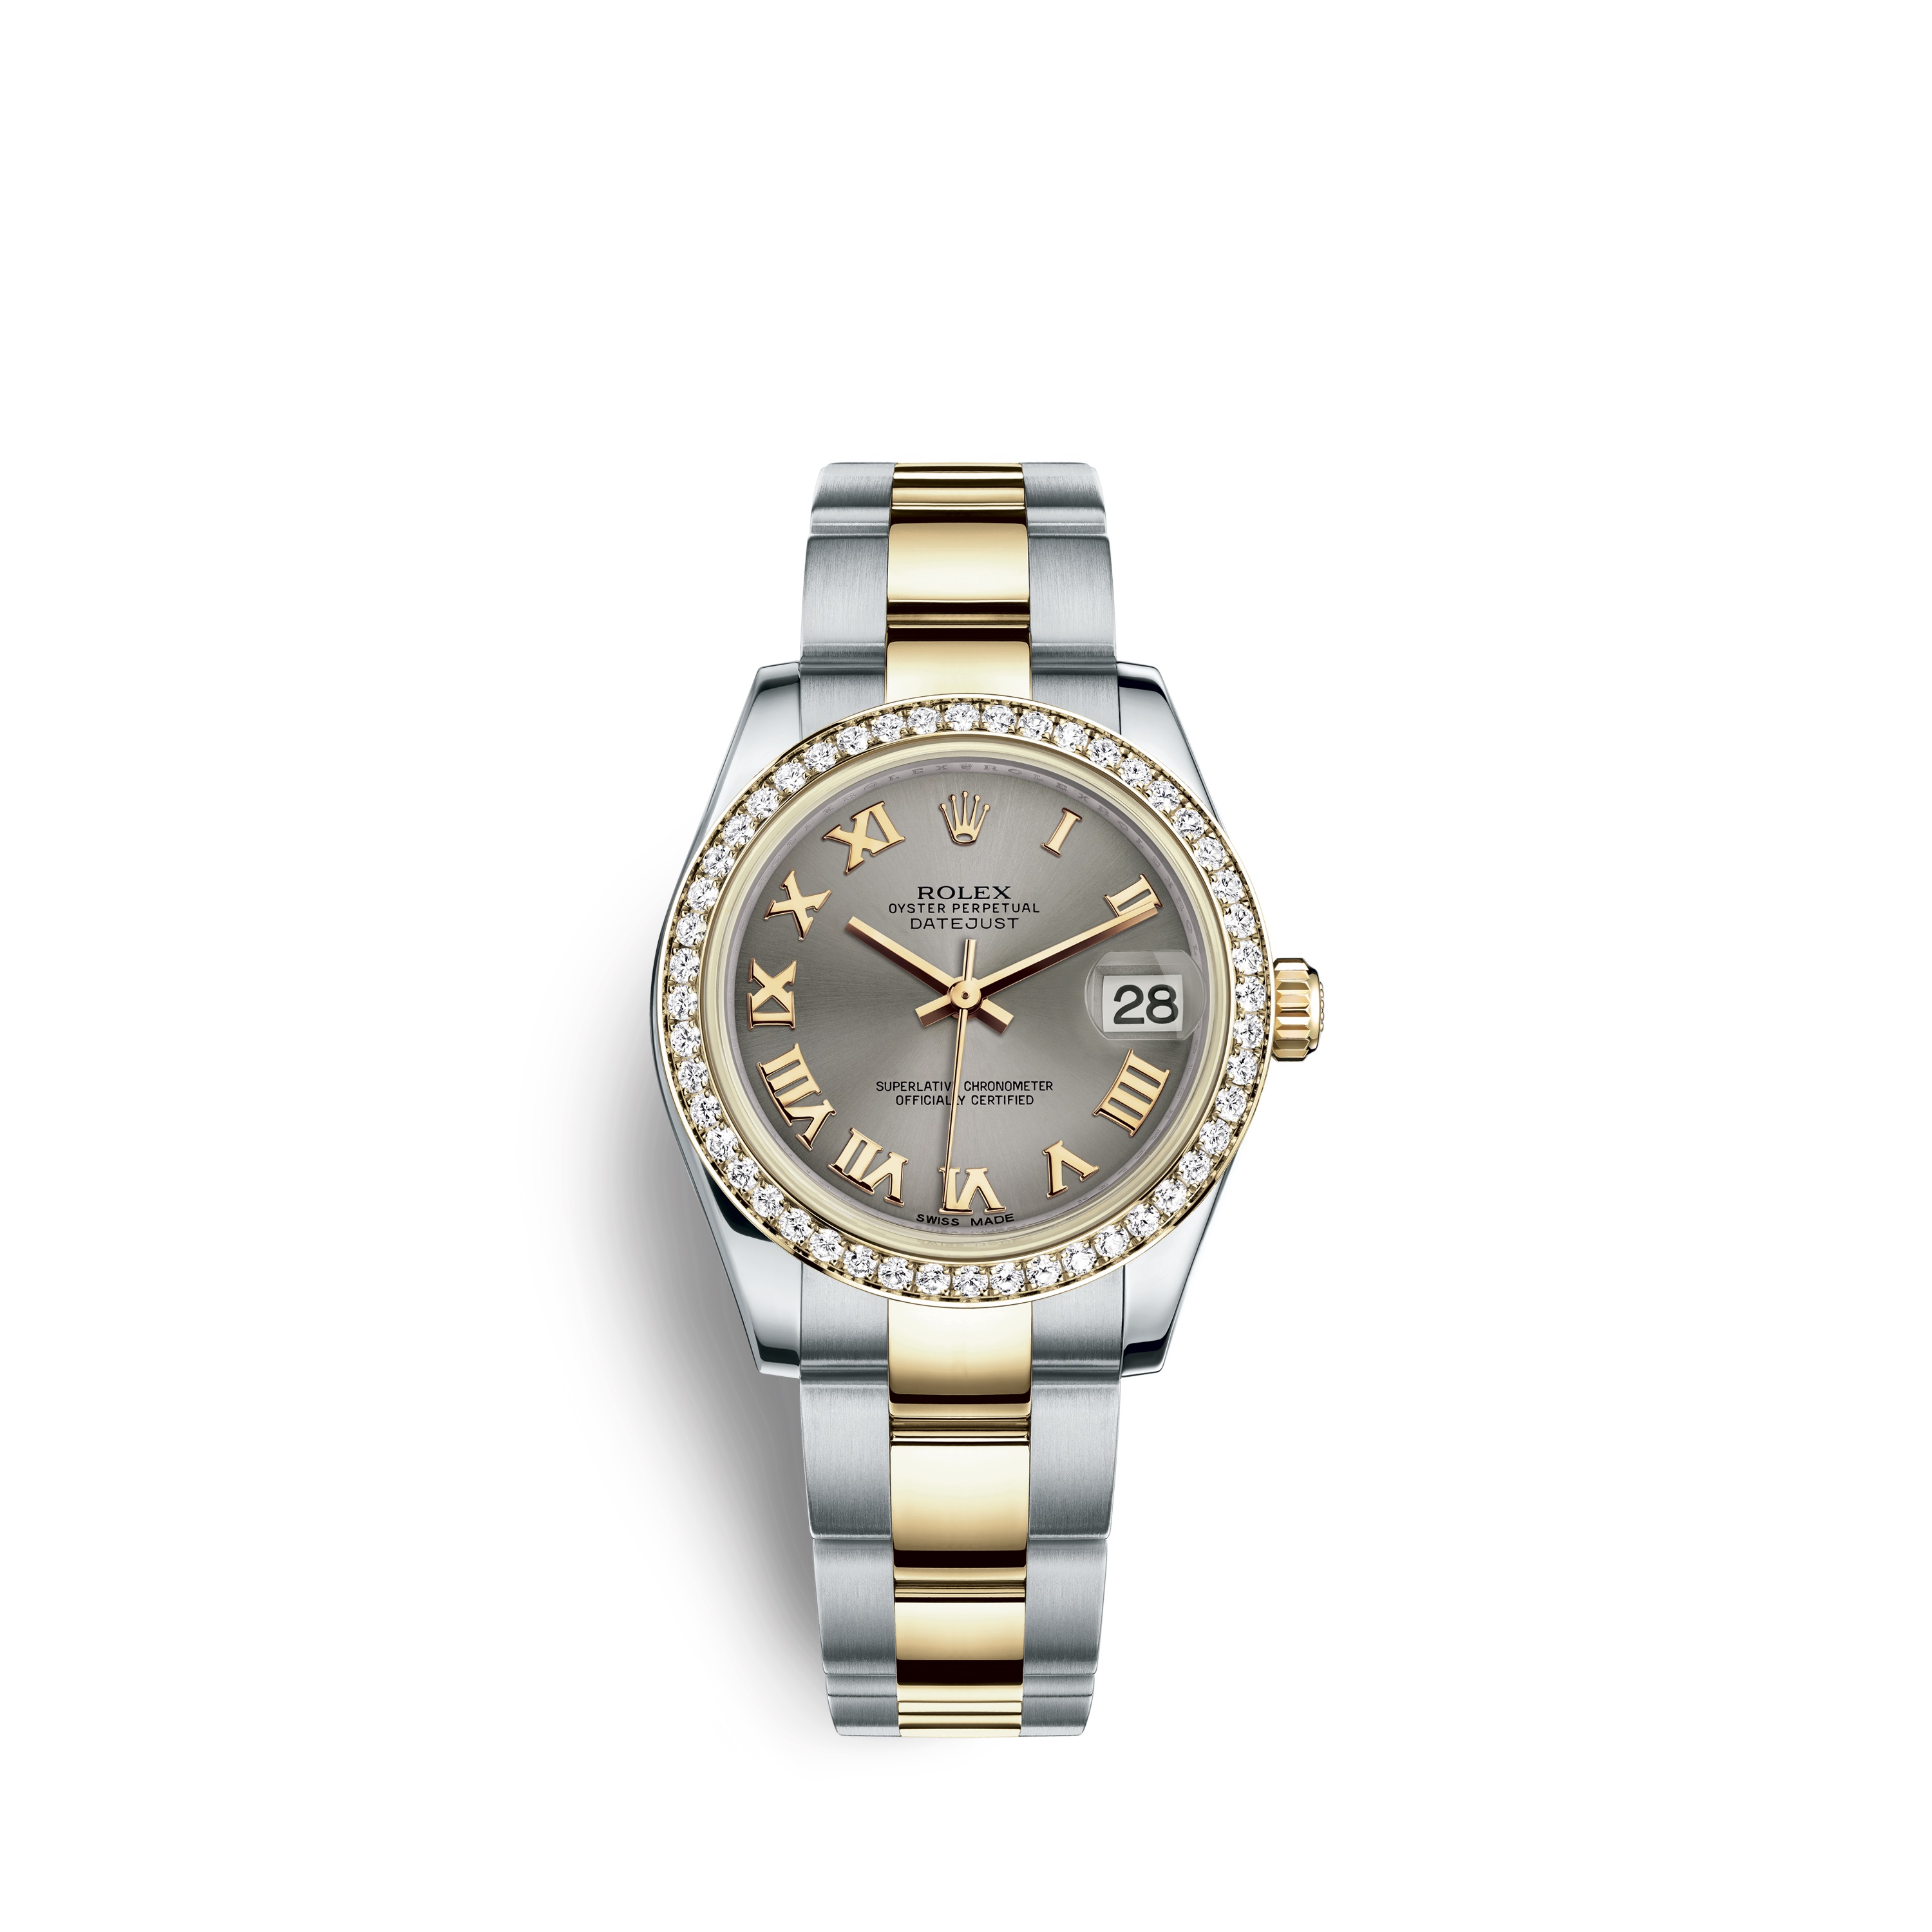 Datejust 31 178383 Gold and Stainless Steel Watch (Steel)